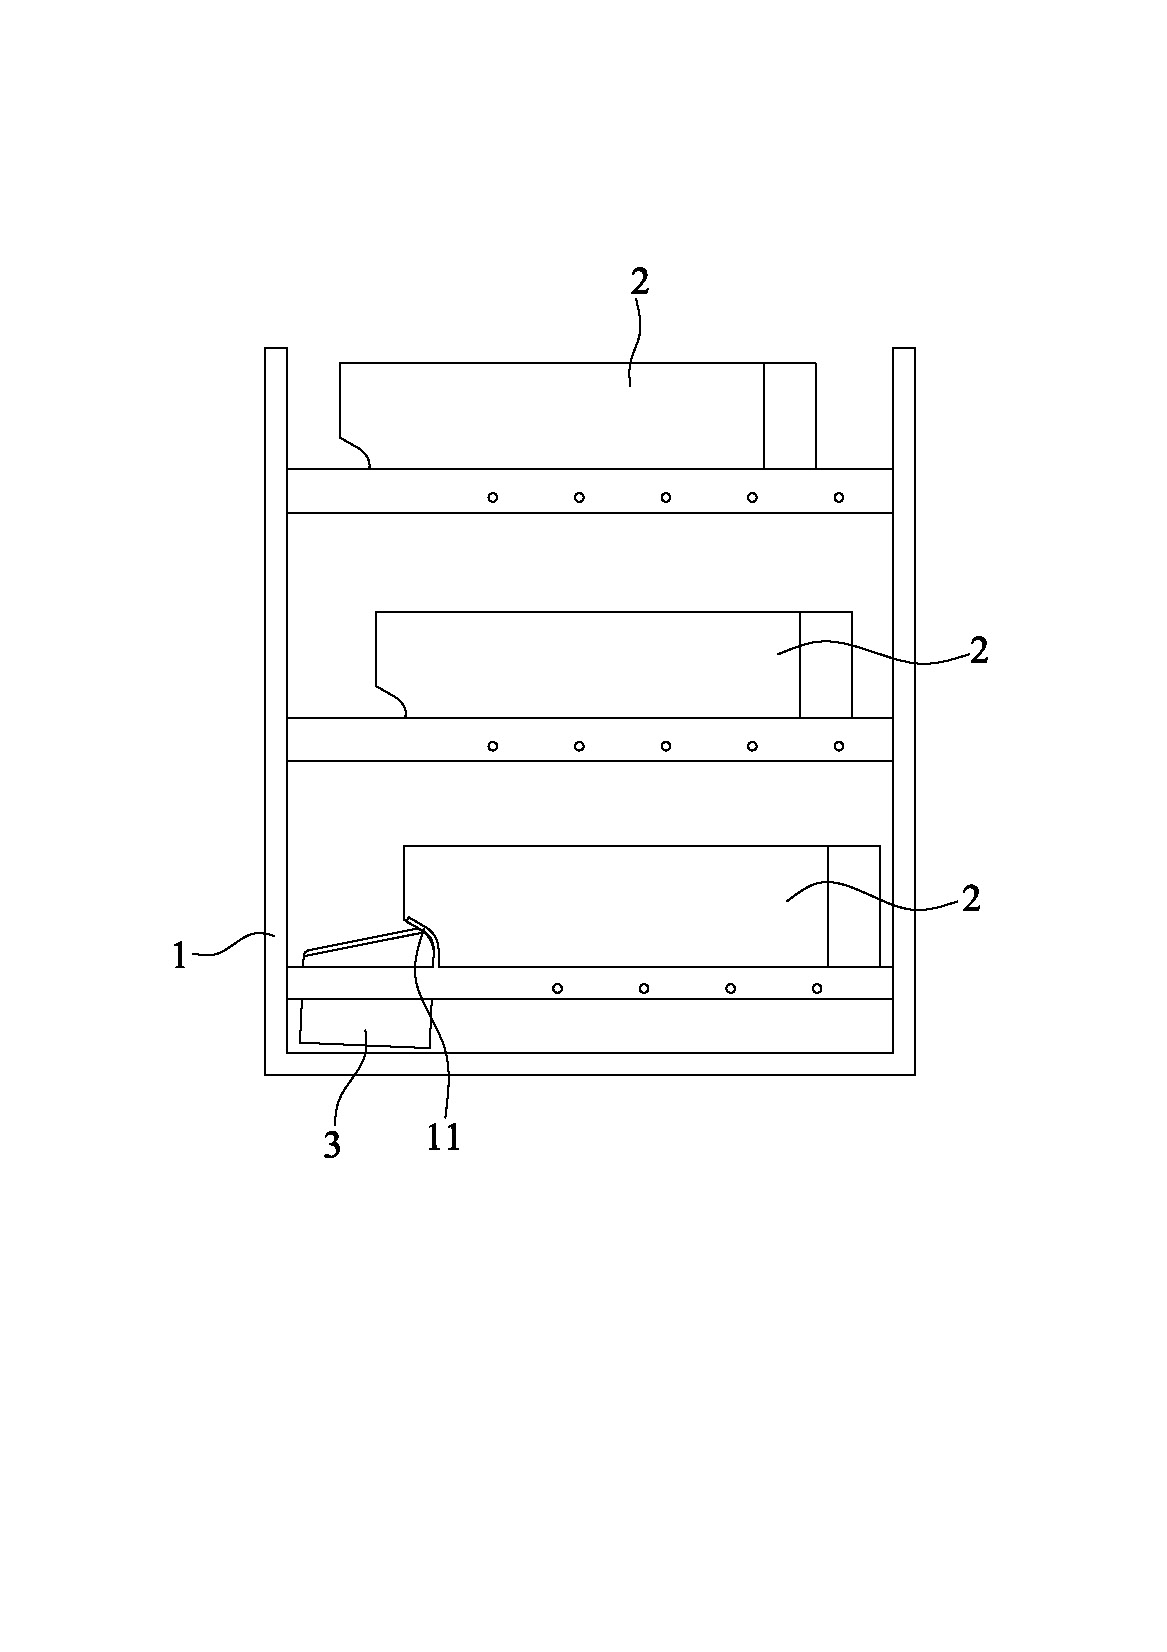 Maggot culture apparatus and large-scale maggot culture system